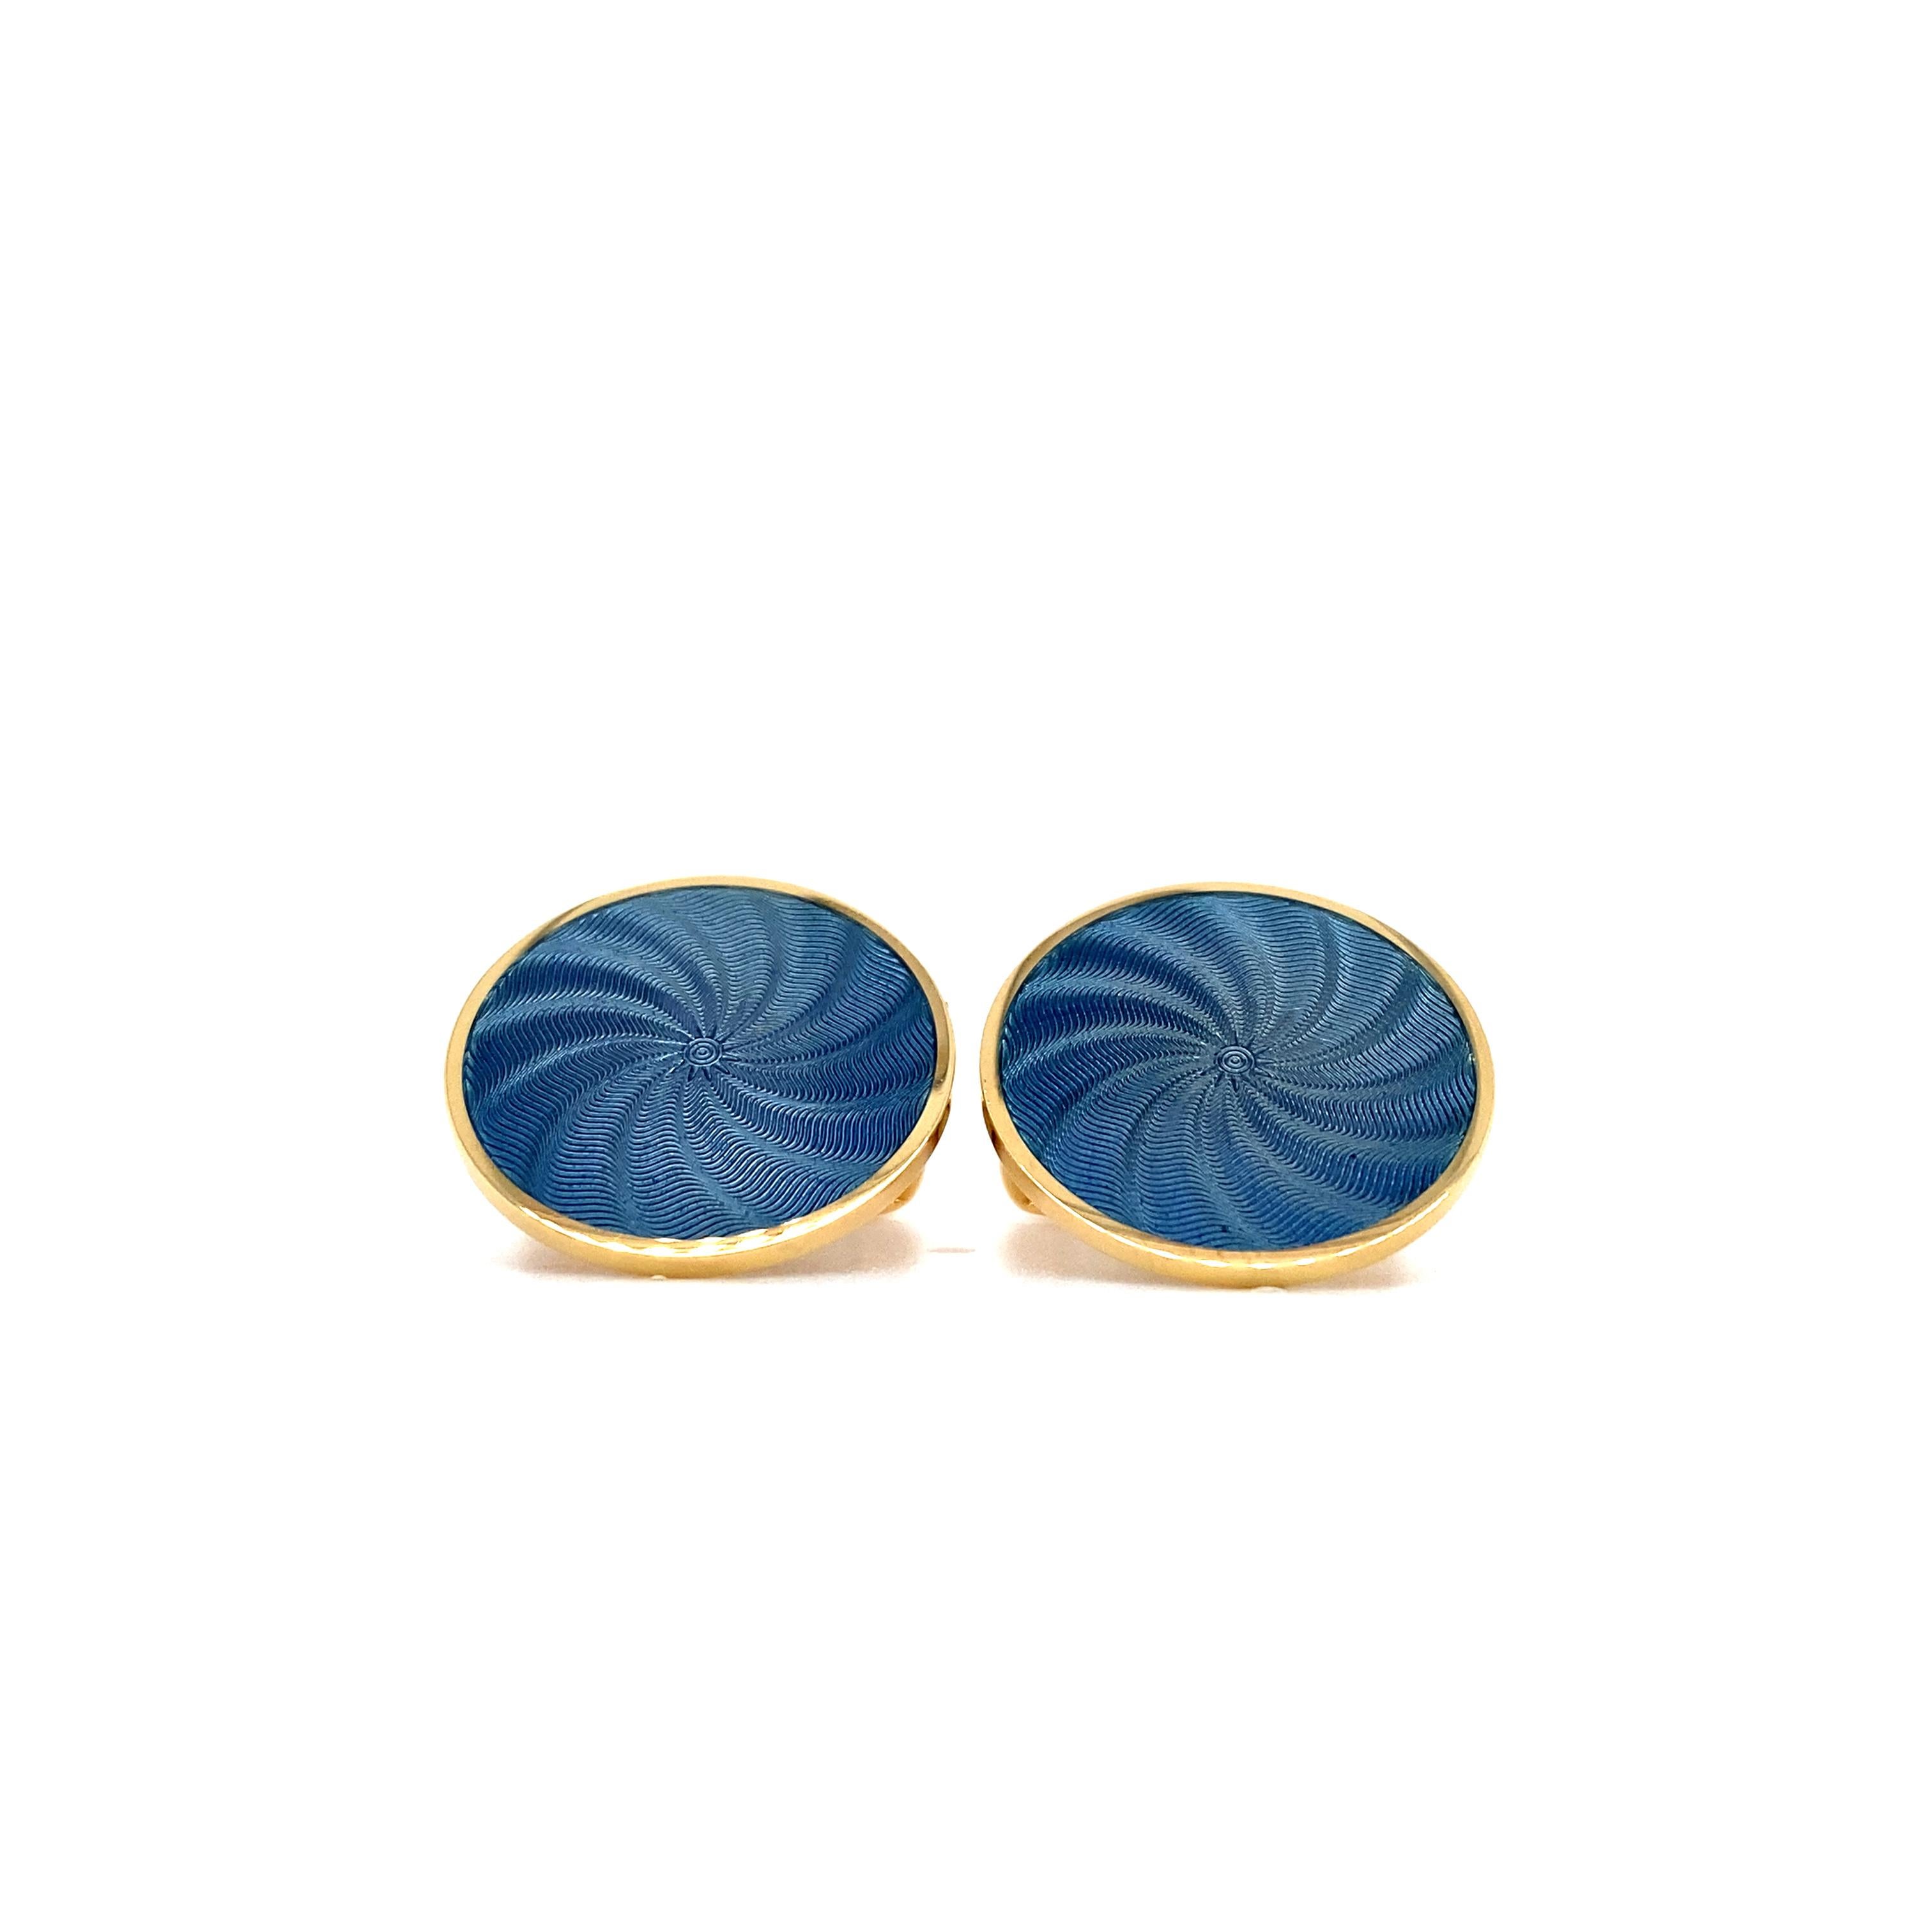 Round Cufflinks, 18k Yellow Gold, Globetrotter Collection by Victor Mayer, Yale Blue Vitreous Guilloche Enamel, Diameter 20.0 mm

About the creator Victor Mayer
Victor Mayer is internationally renowned for elegant timeless designs and unrivalled